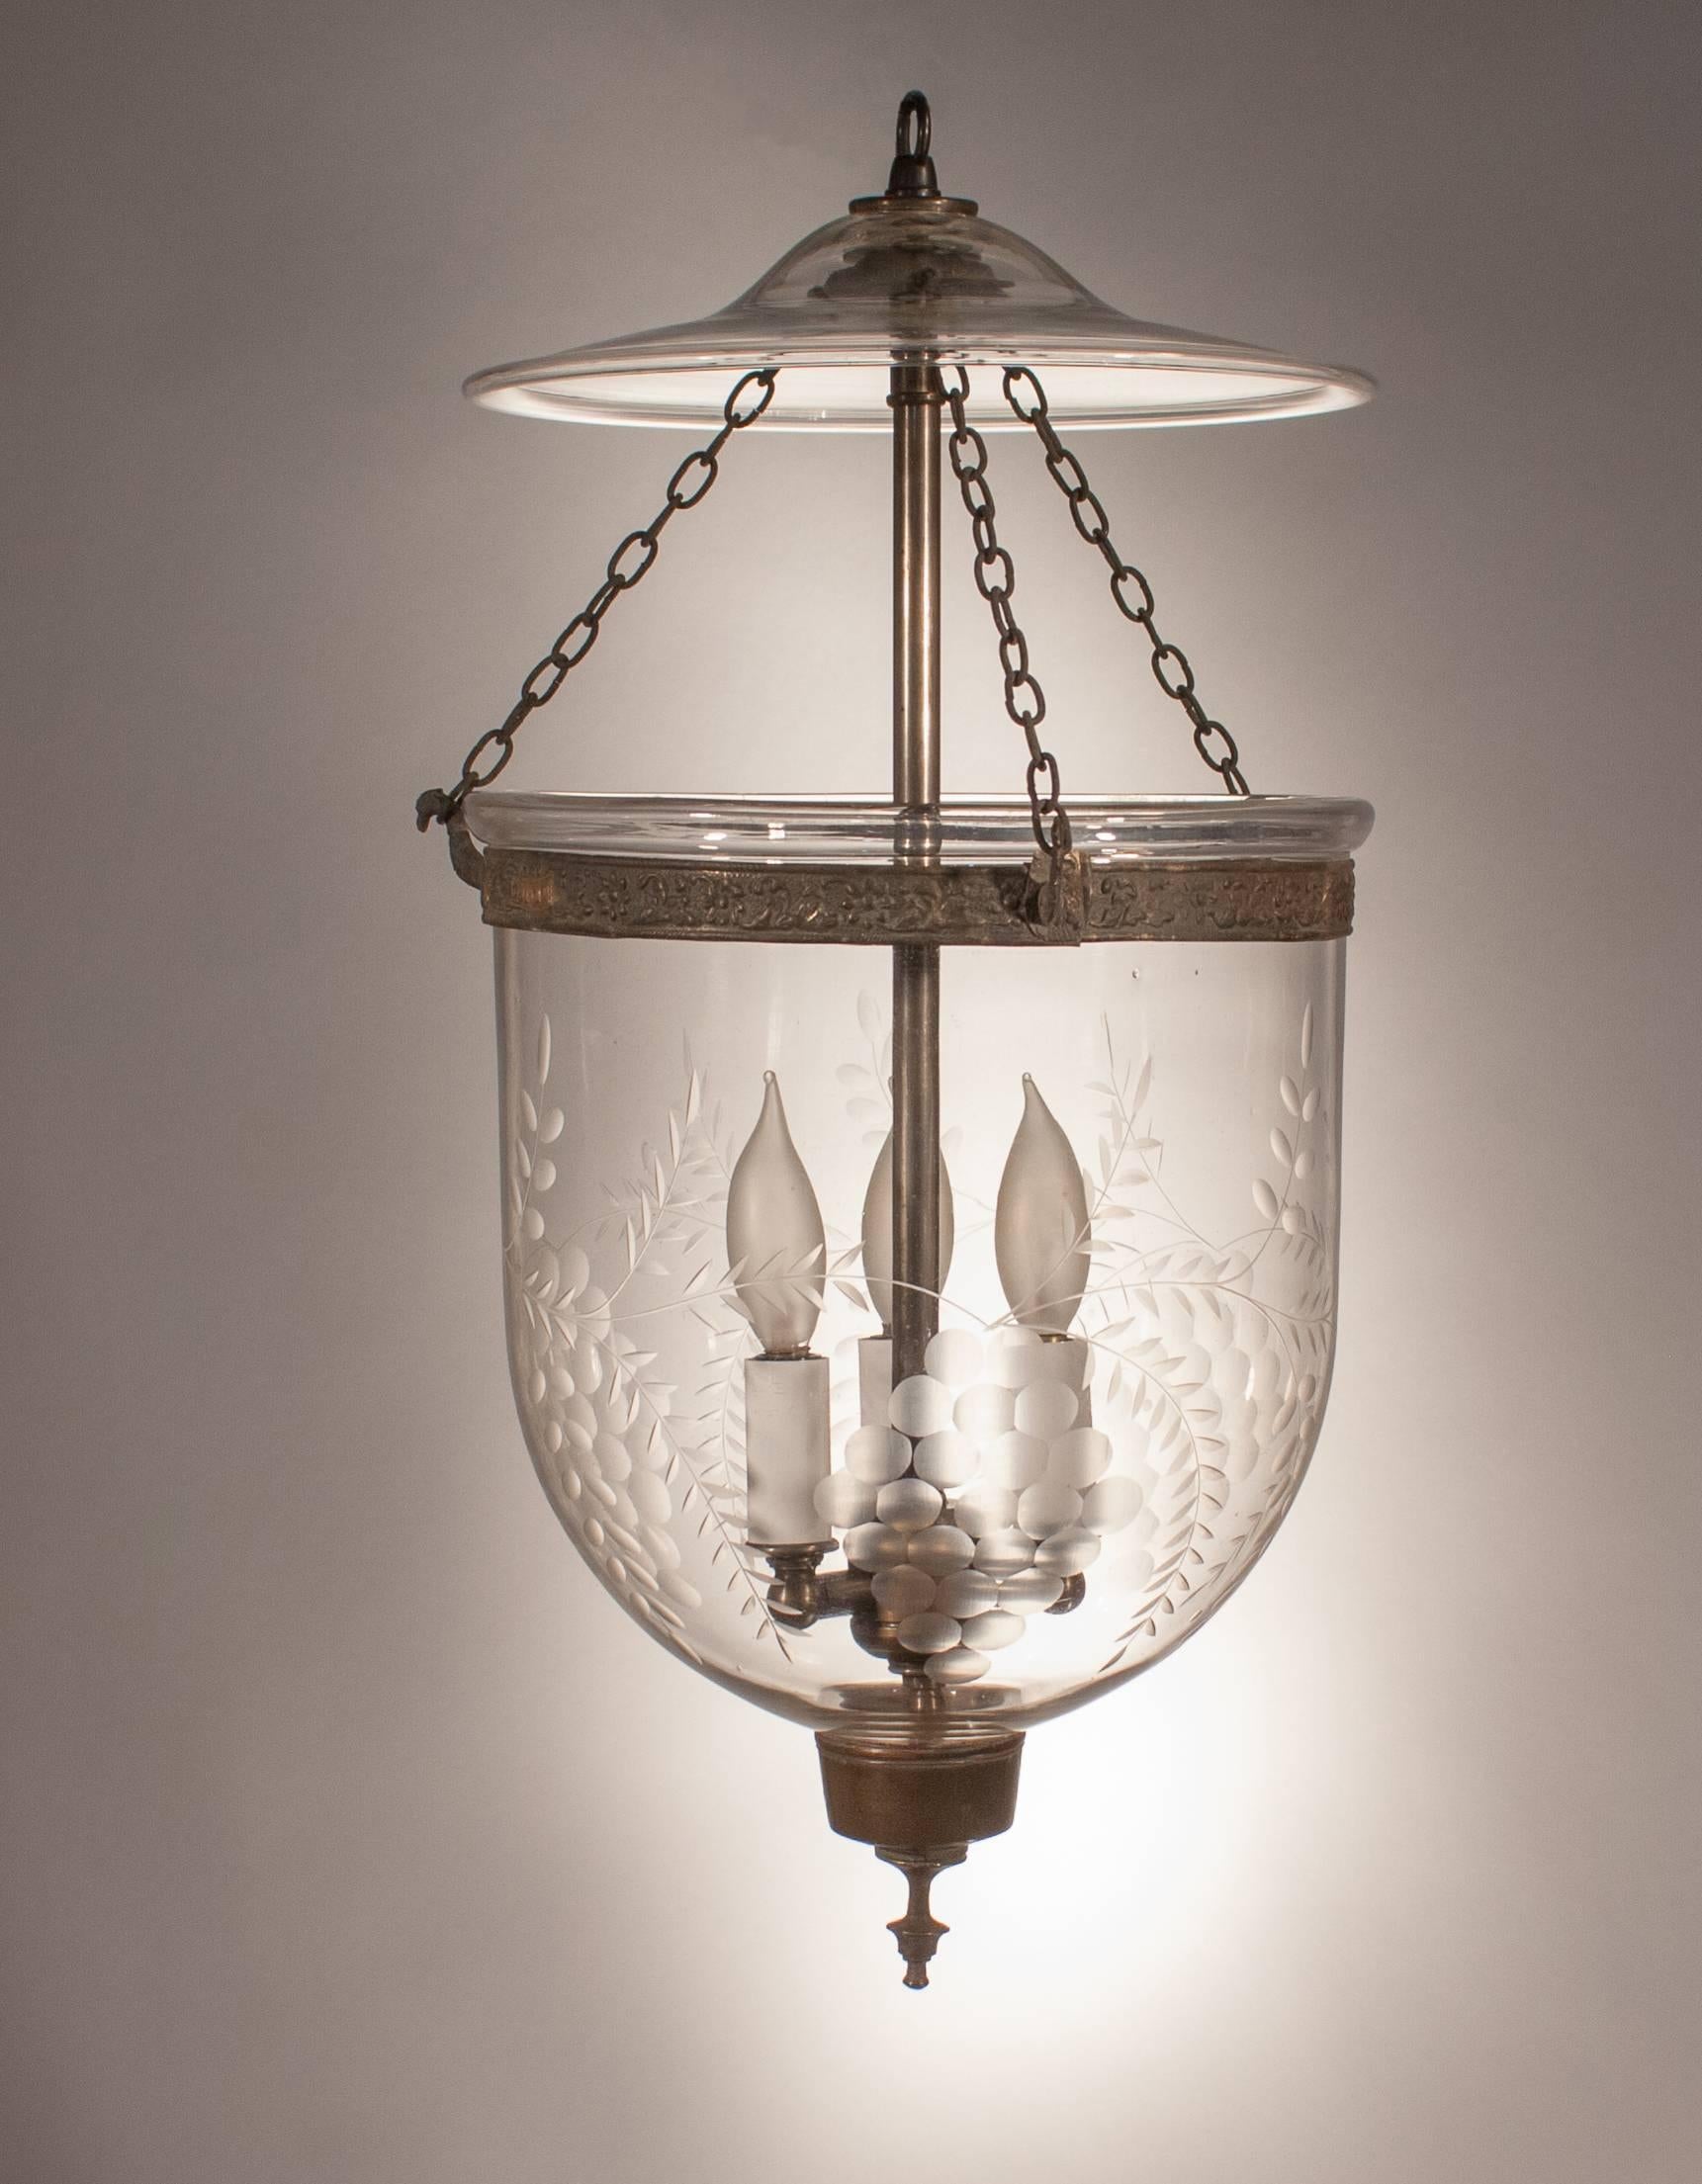 A lovely 19th century English handblown glass bell jar lantern with an etched grape motif. This circa 1860 hall lantern has beautiful form and all-original fittings—including its glass smoke bell, brass candle holder finial, and brass band with